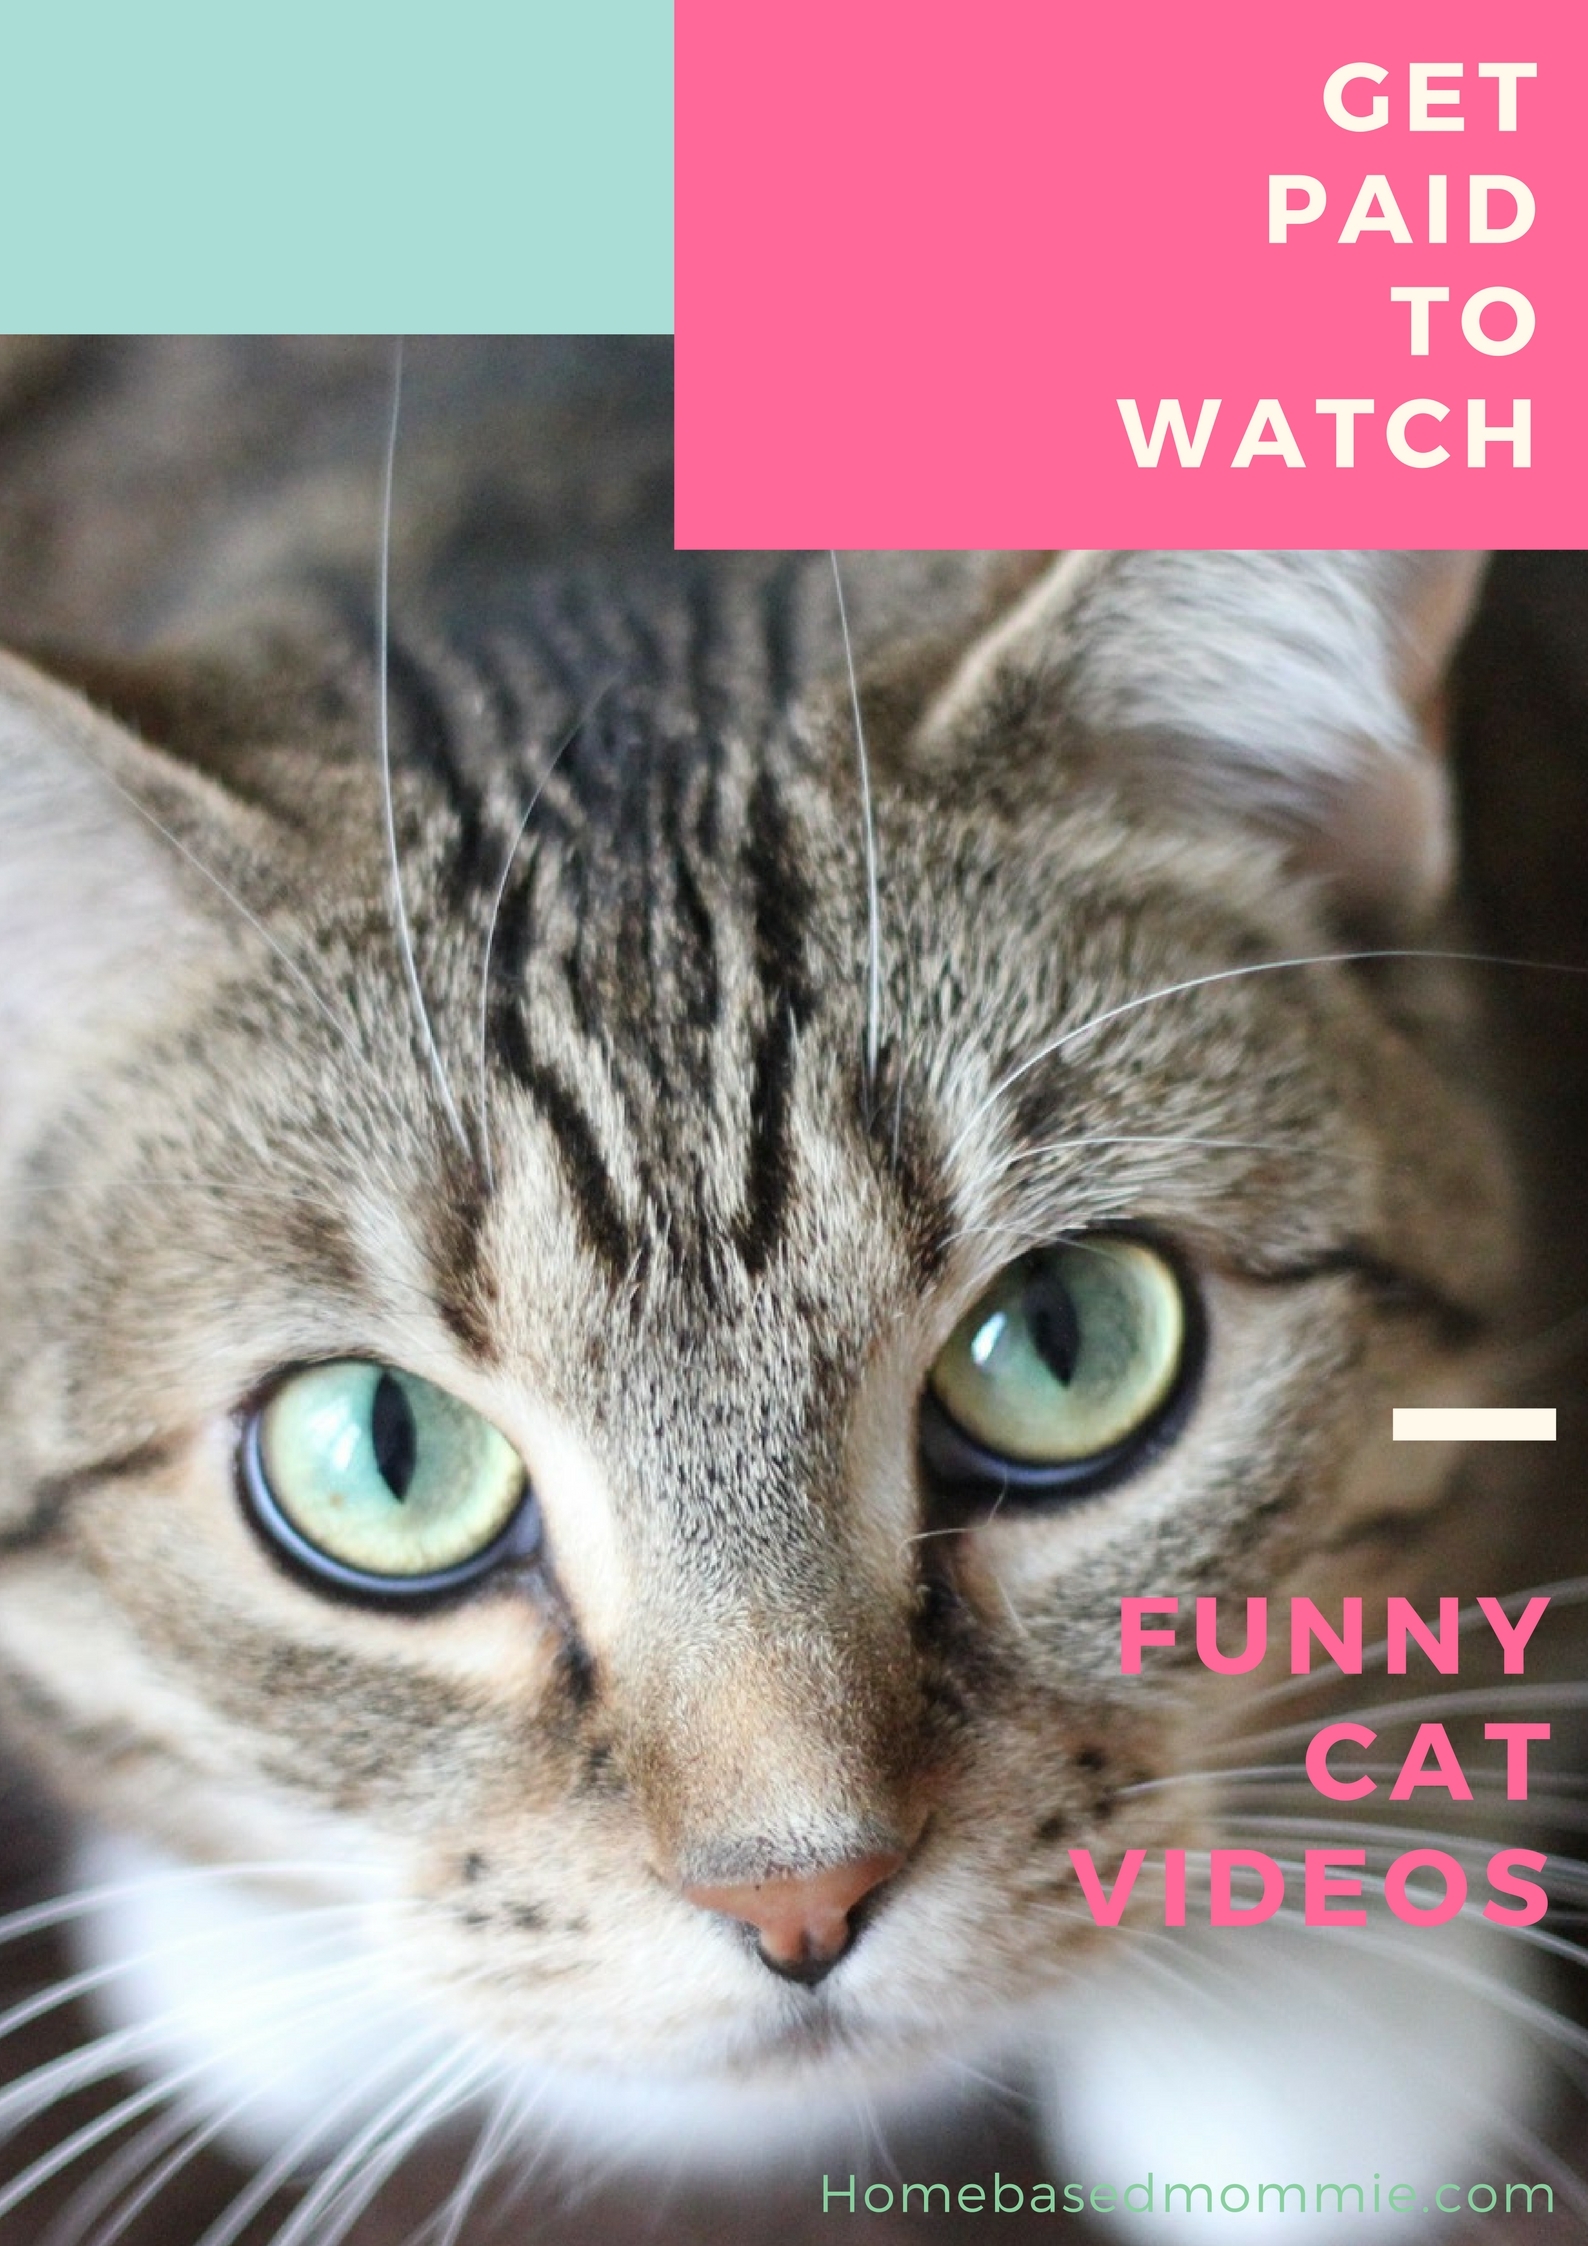 Get Paid to Watch Funny Cat Videos - Homebasedmommie